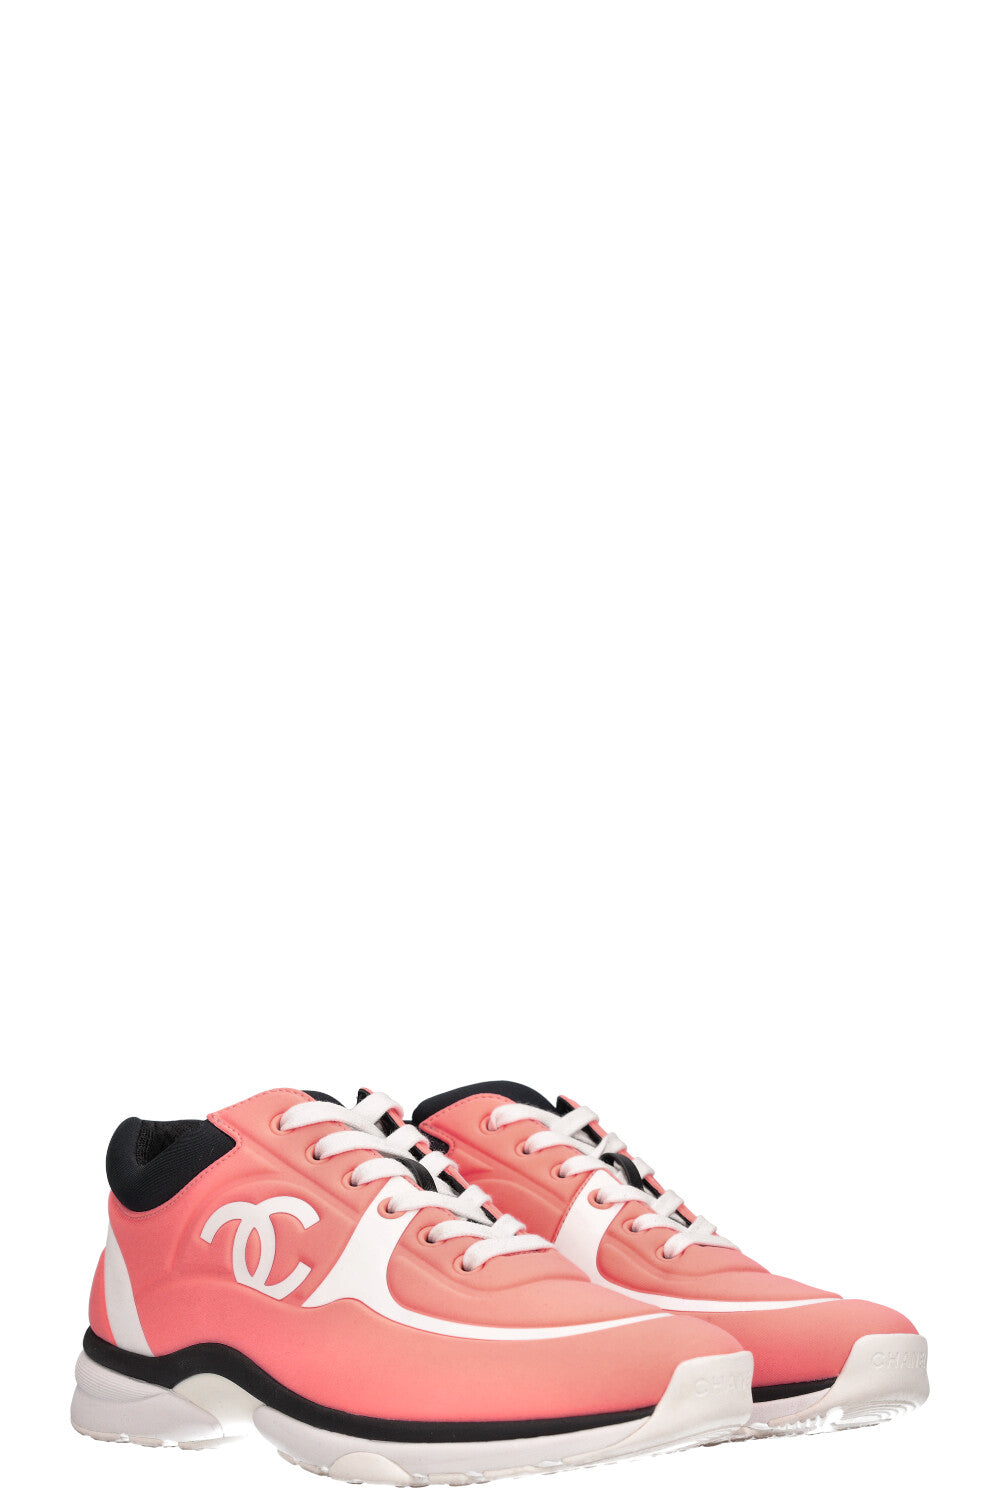 CHANEL CC Sneakers Coral